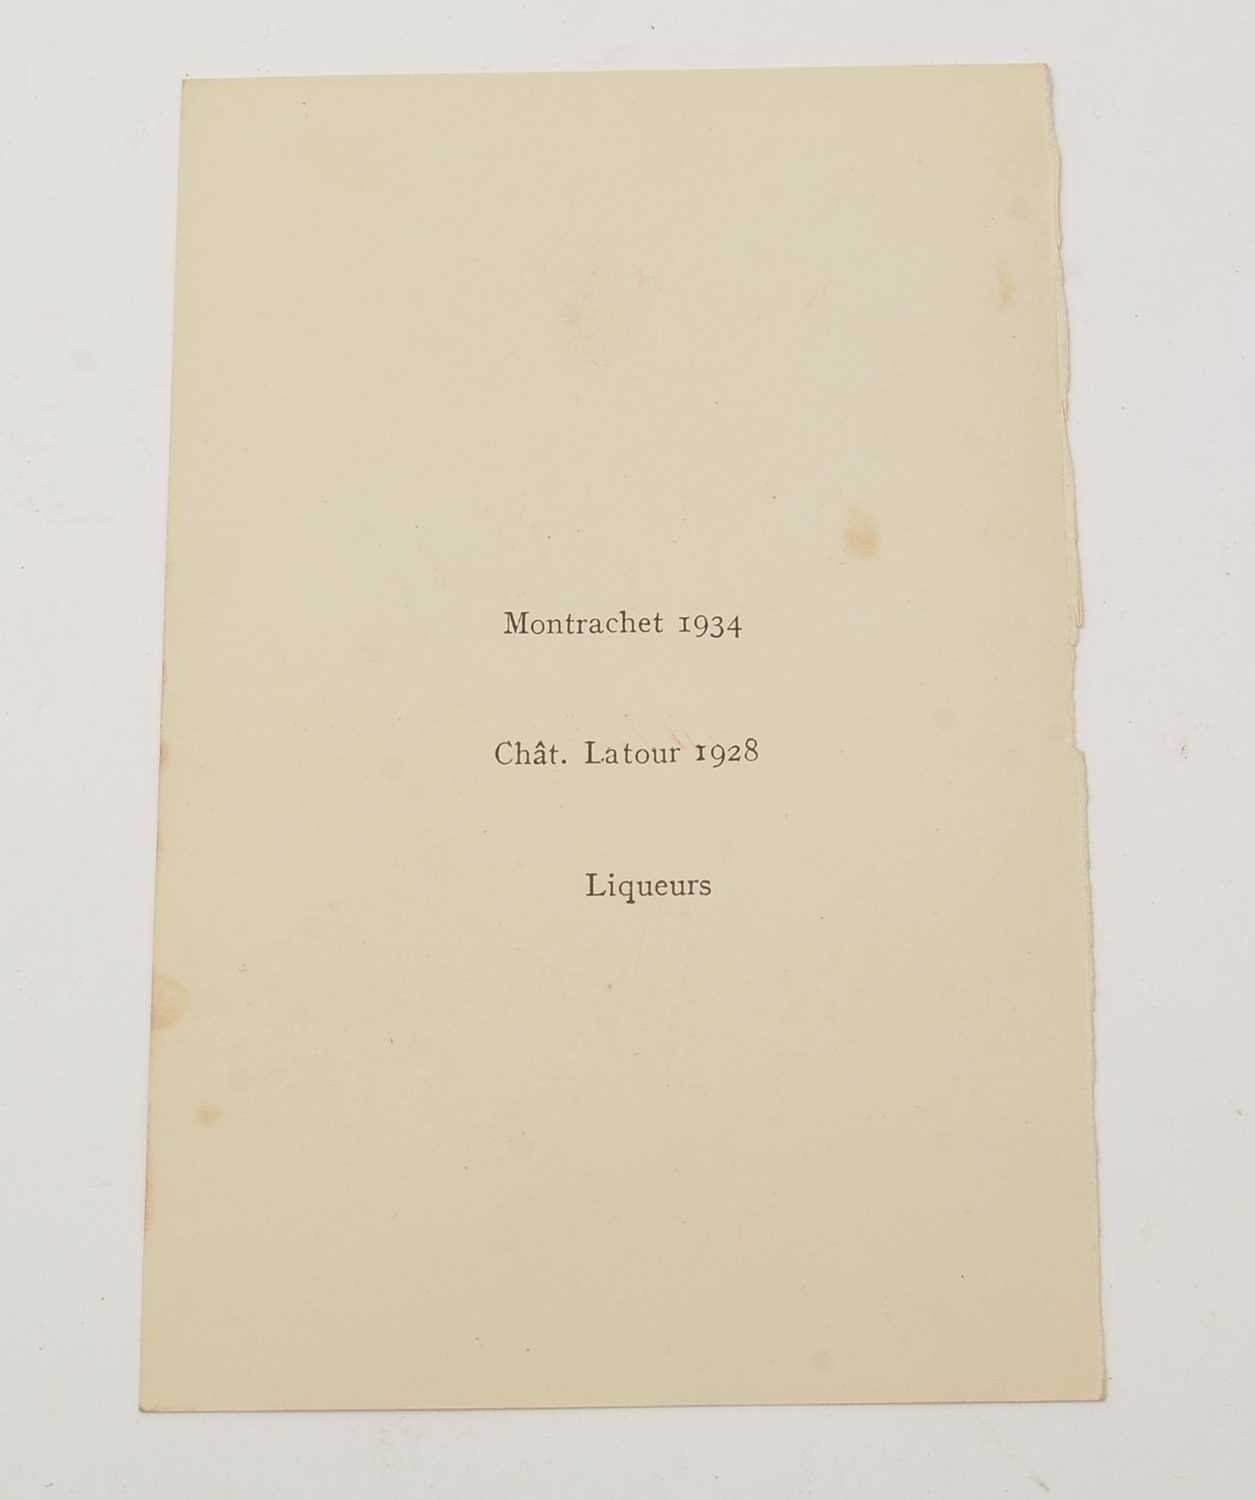 The Common Place of Dinner Party book of signatures compiled by Sir William Strang - Image 25 of 31